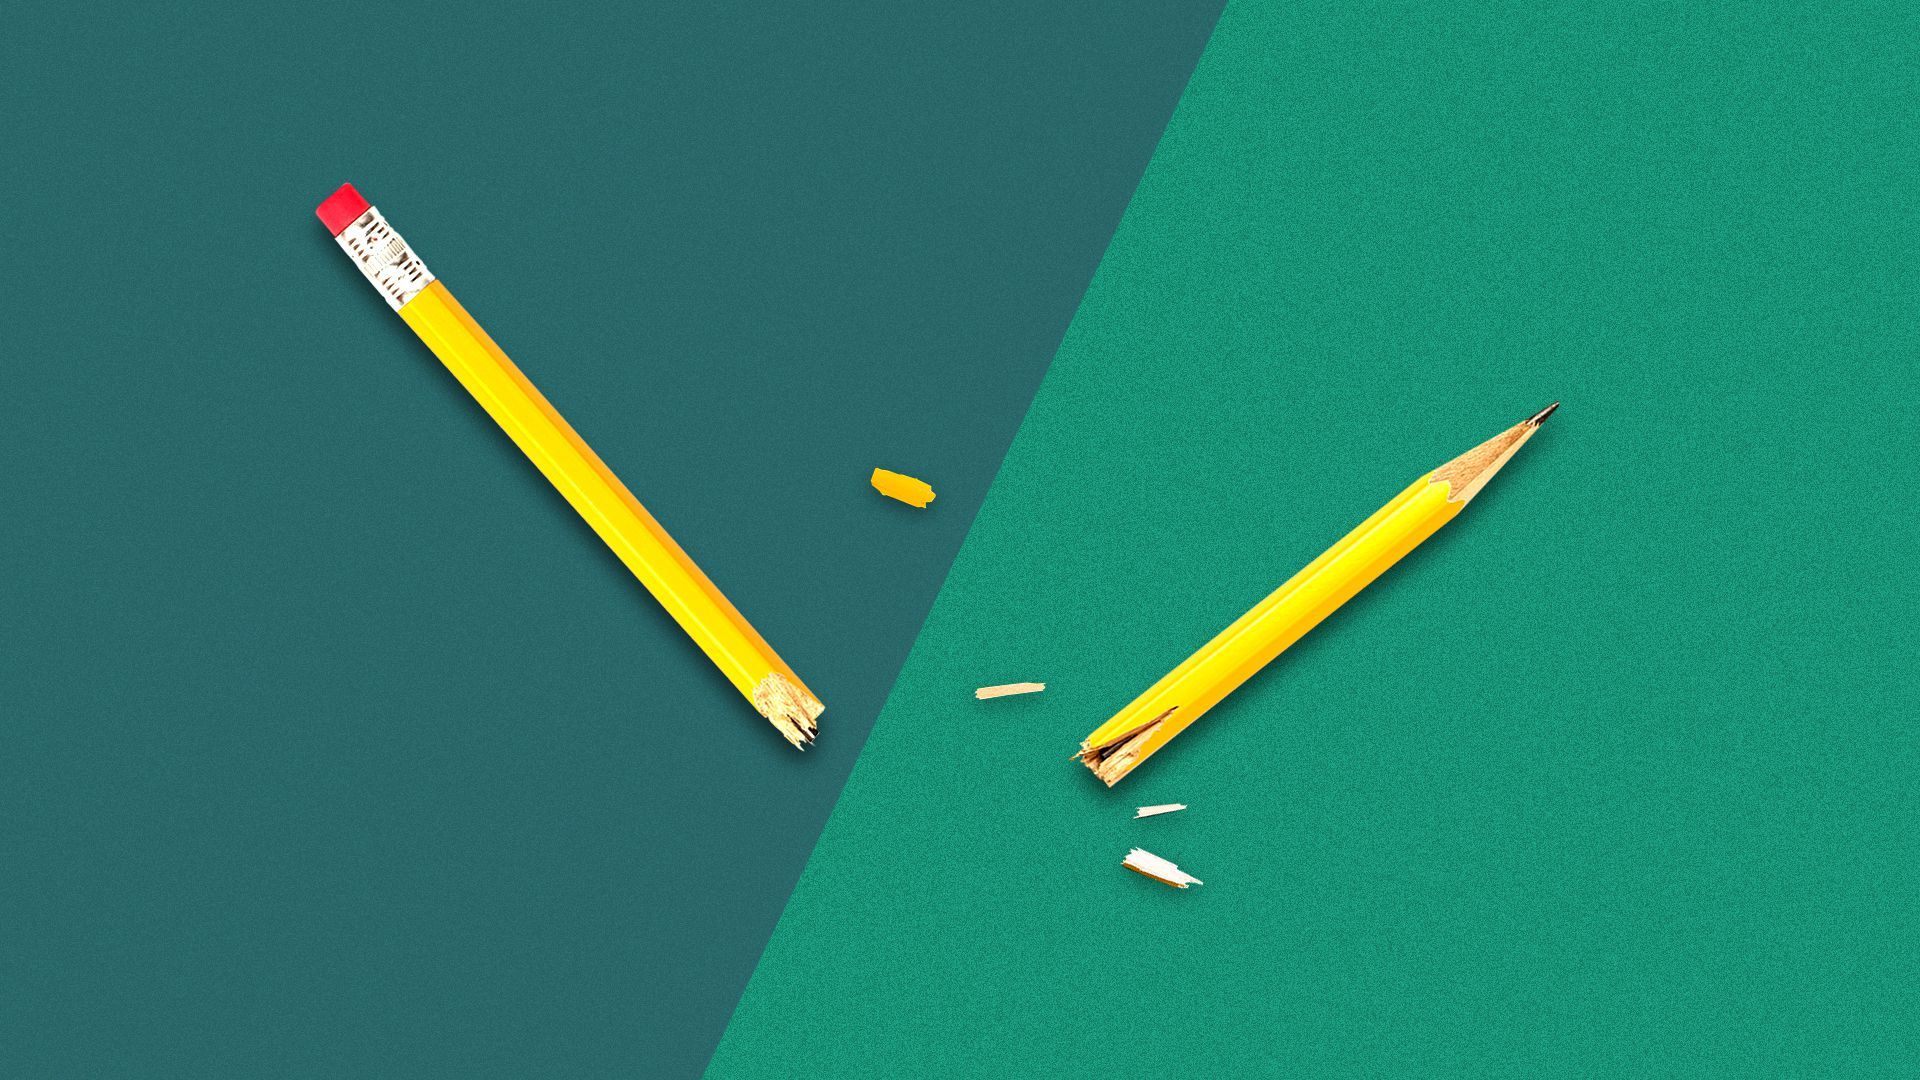 Illustration of a pencil broken in half on a divided background